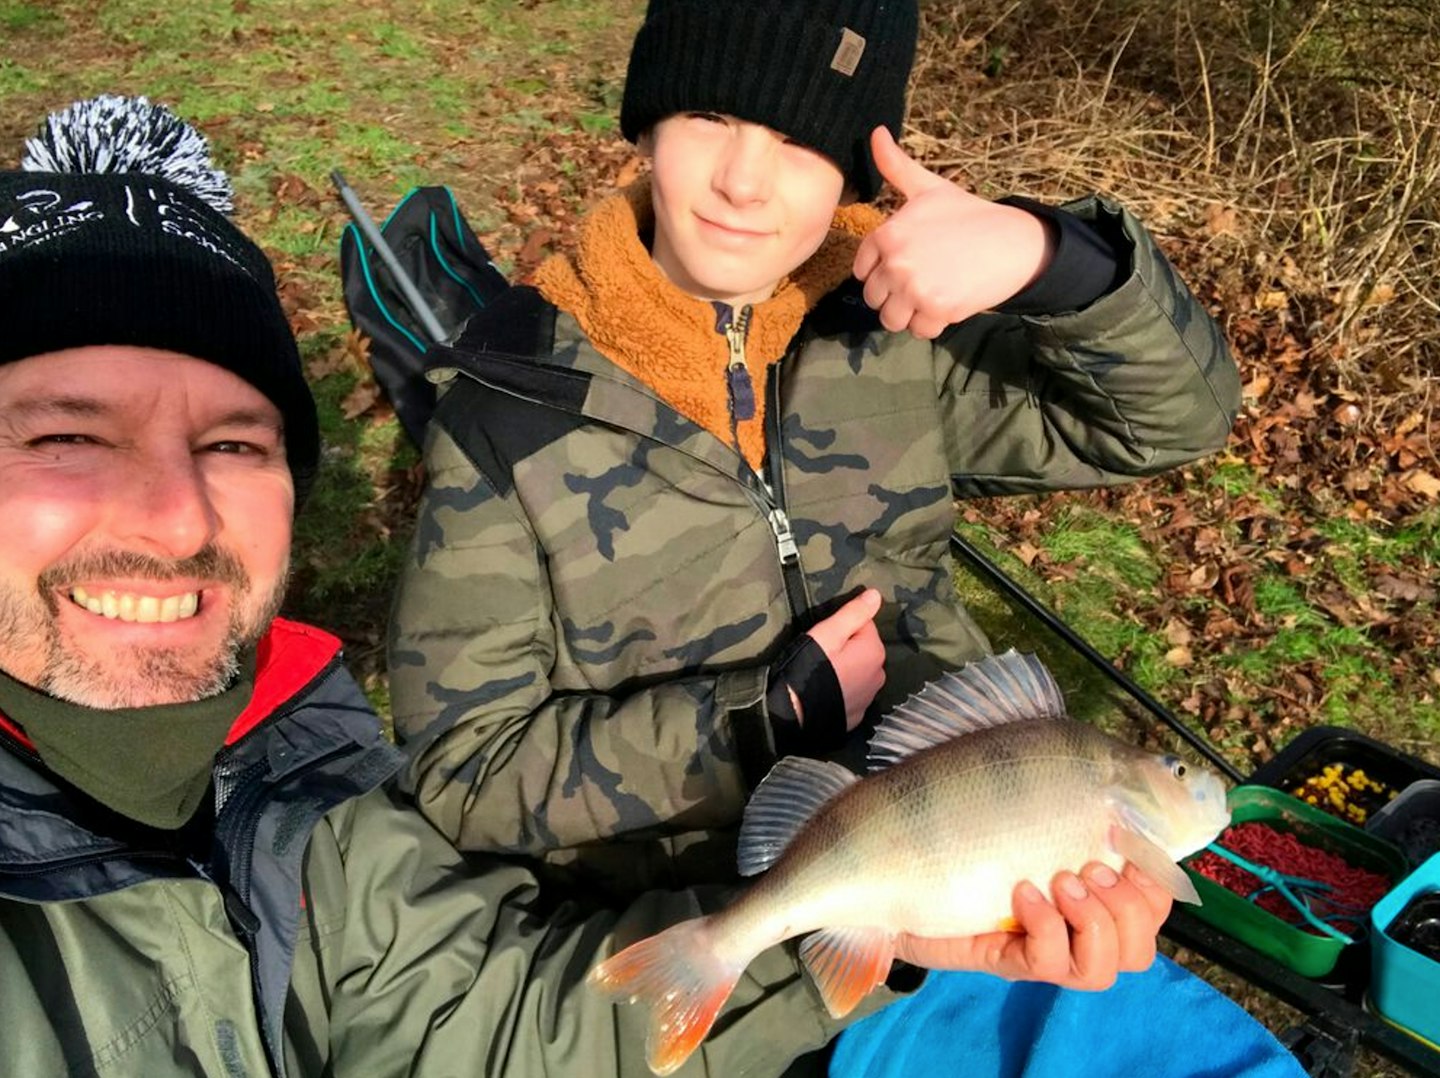 The owner of the pits, Mark Egerton, is an angling coach